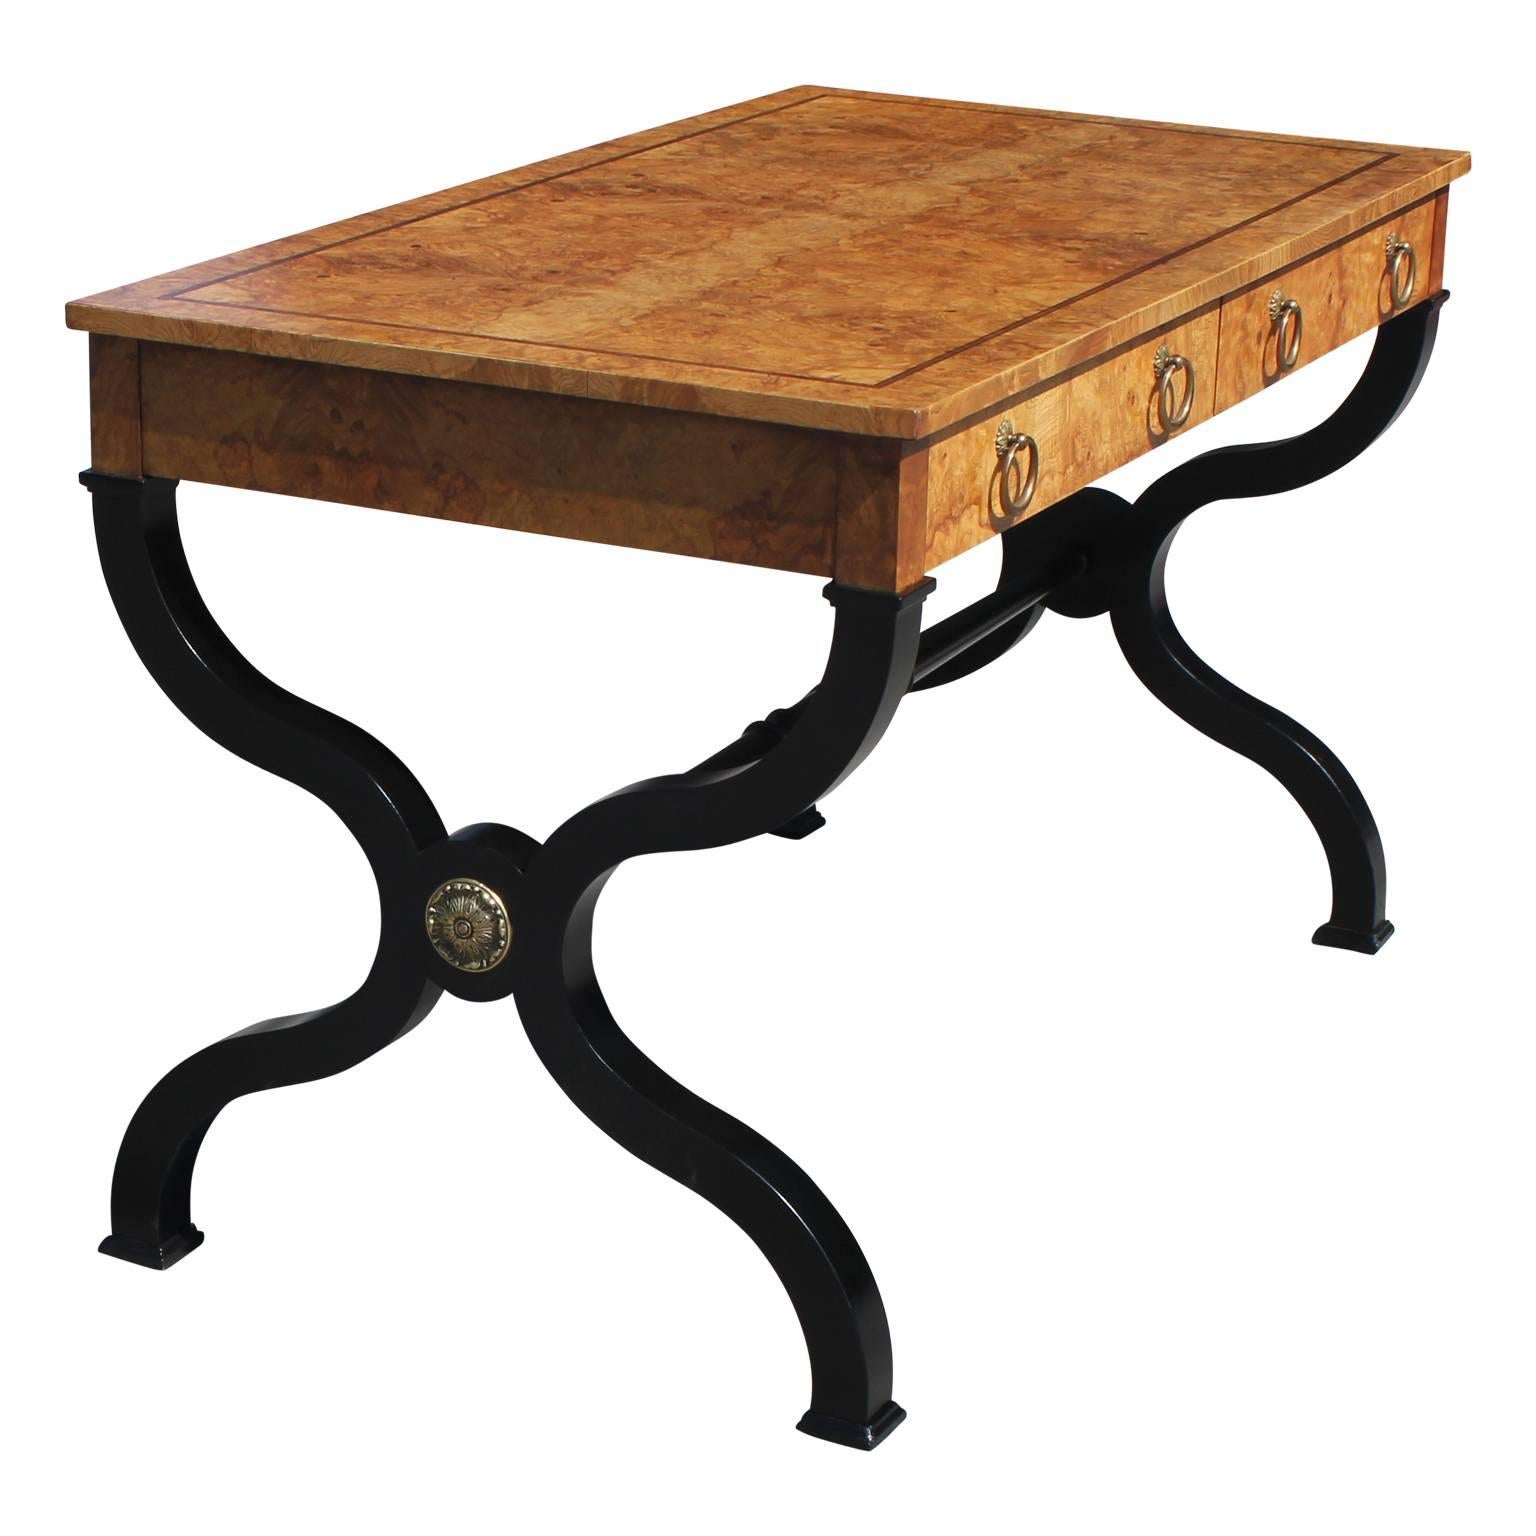 Gorgeous modern French burl wood desk with black Regency style legs, brass hardware and a rosewood or mahogany inlay.